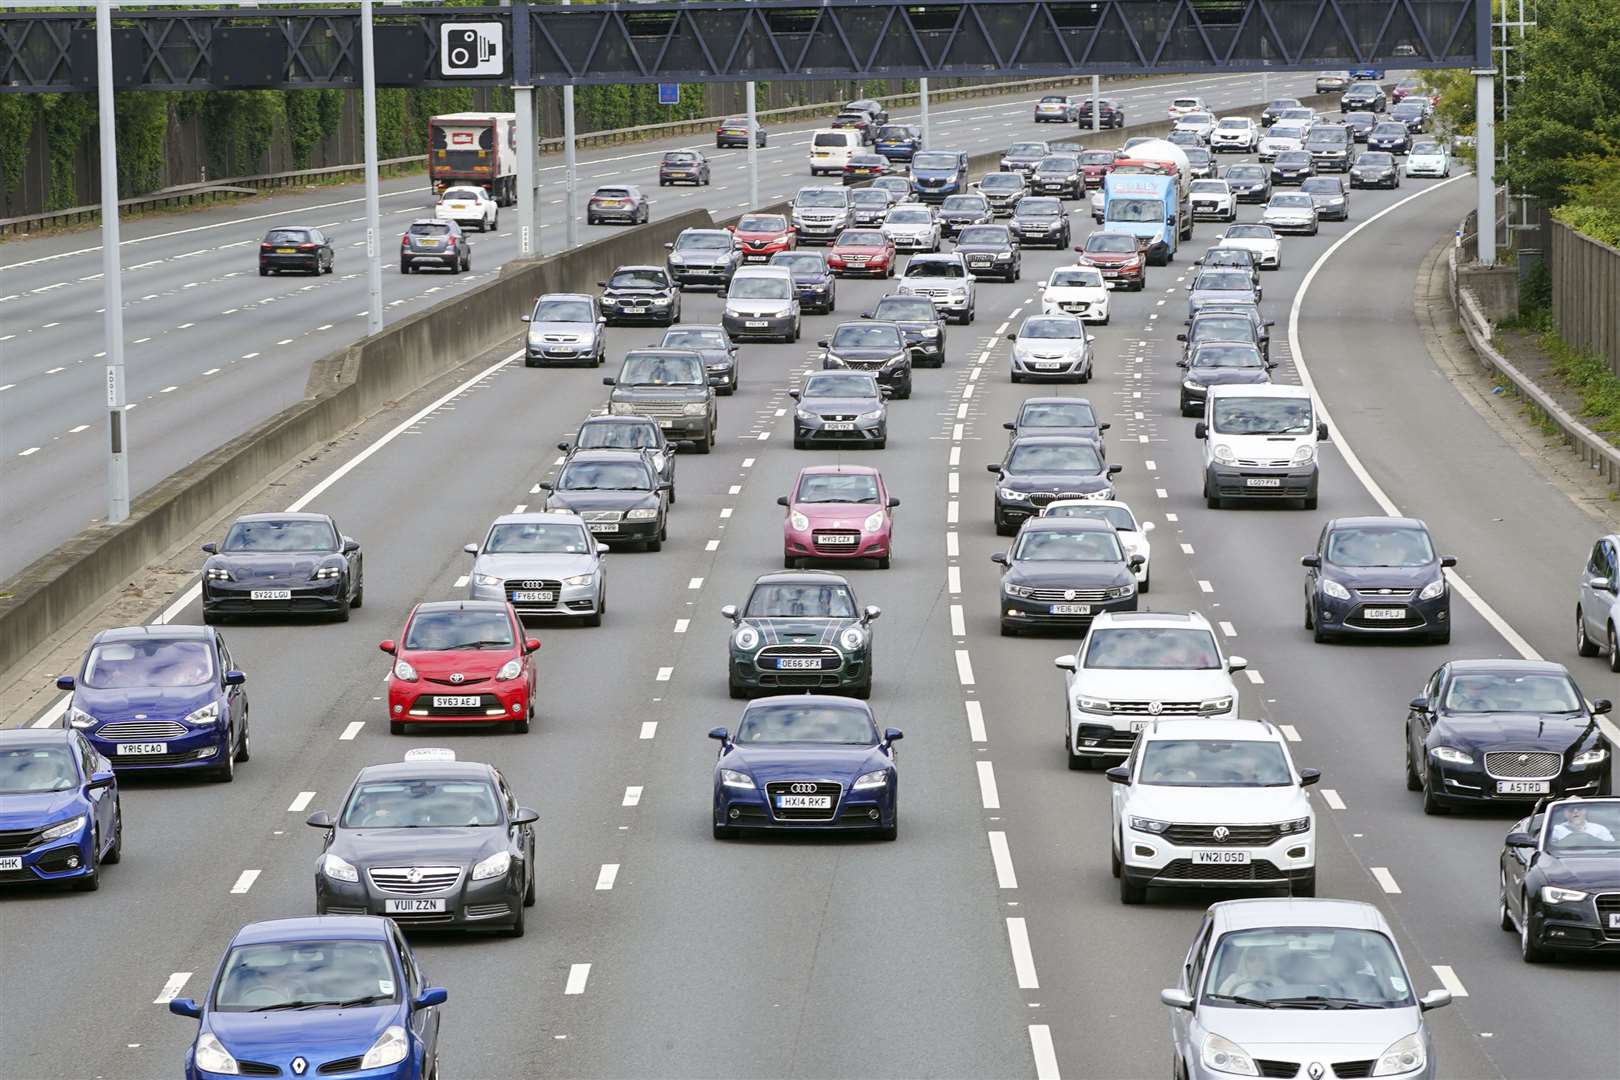 The campaign aims to raise awareness of the dangers of middle lane hogging and tailgating (PA)